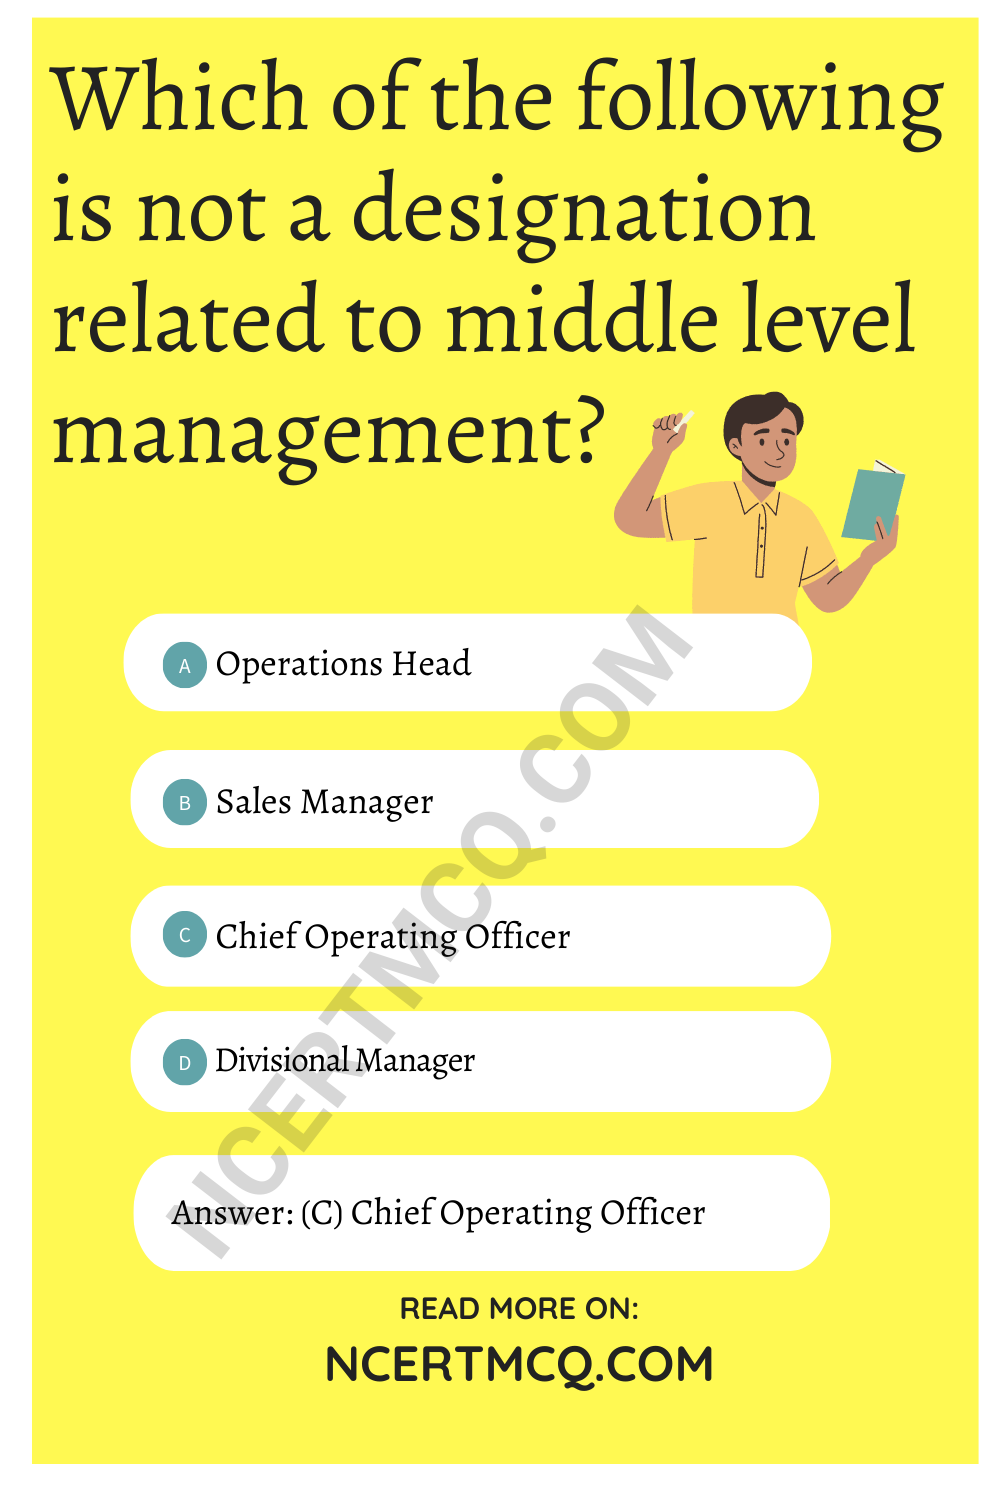 Which of the following is not a designation related to middle level management?